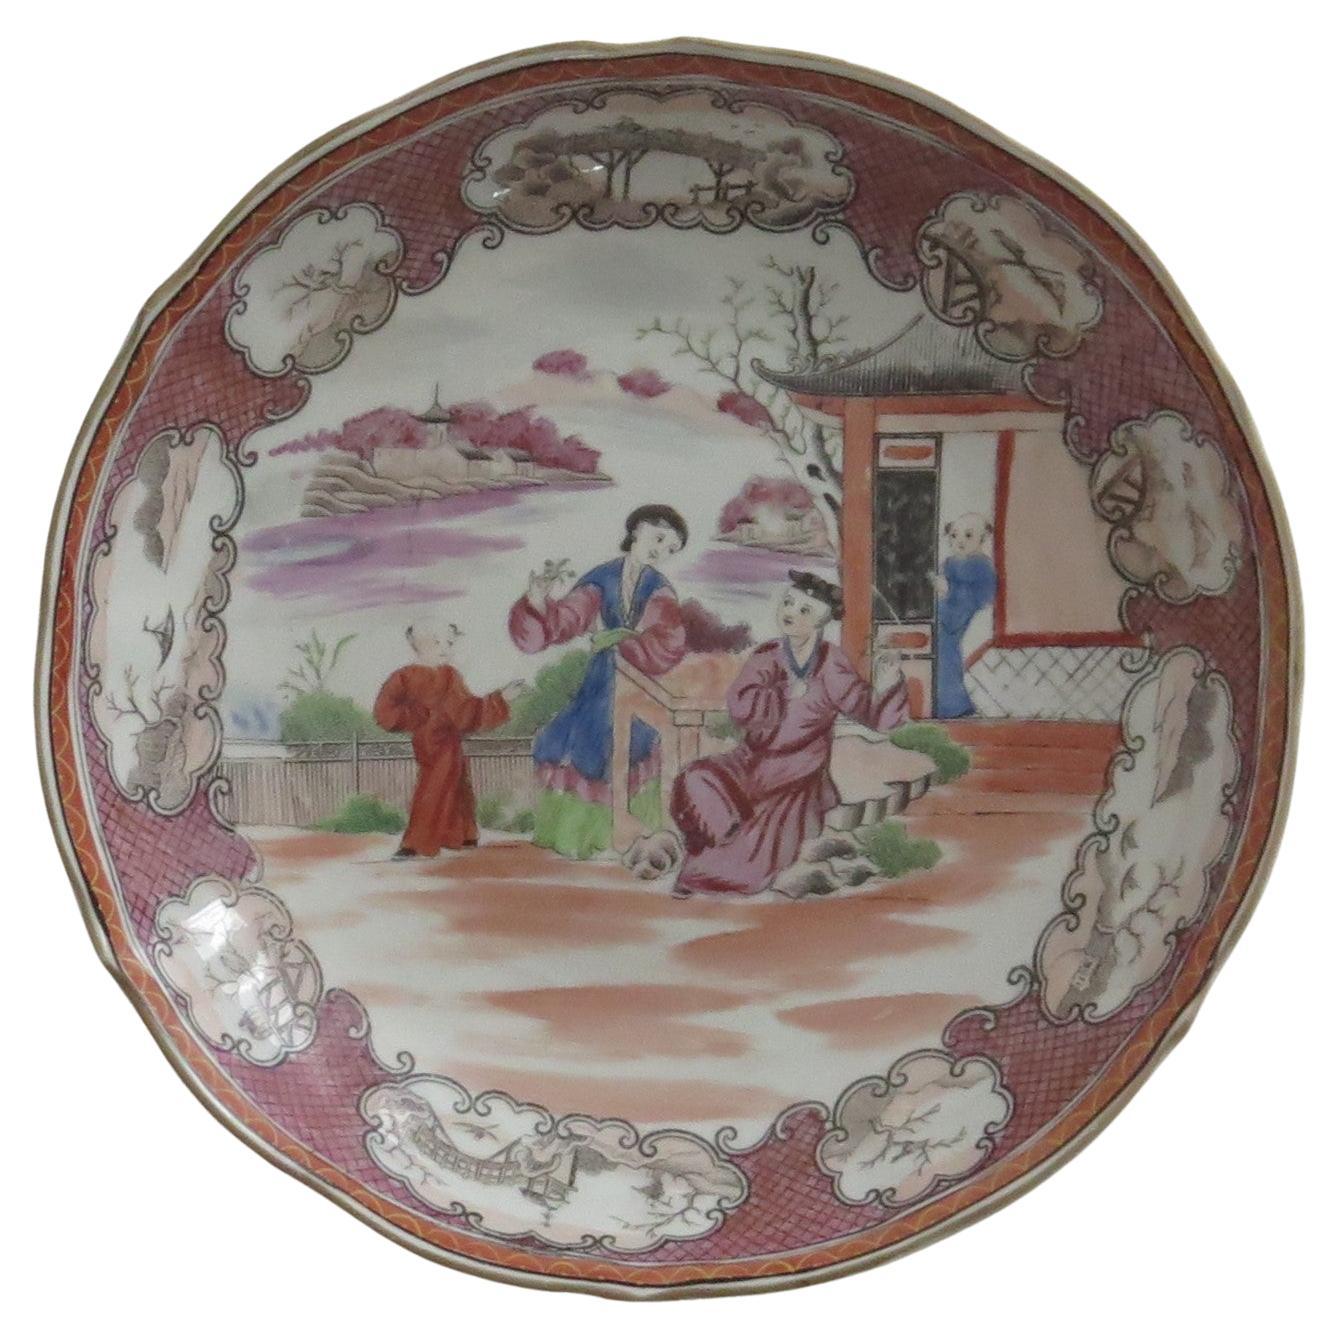 This is a porcelain Saucer Dish or Bowl in the 